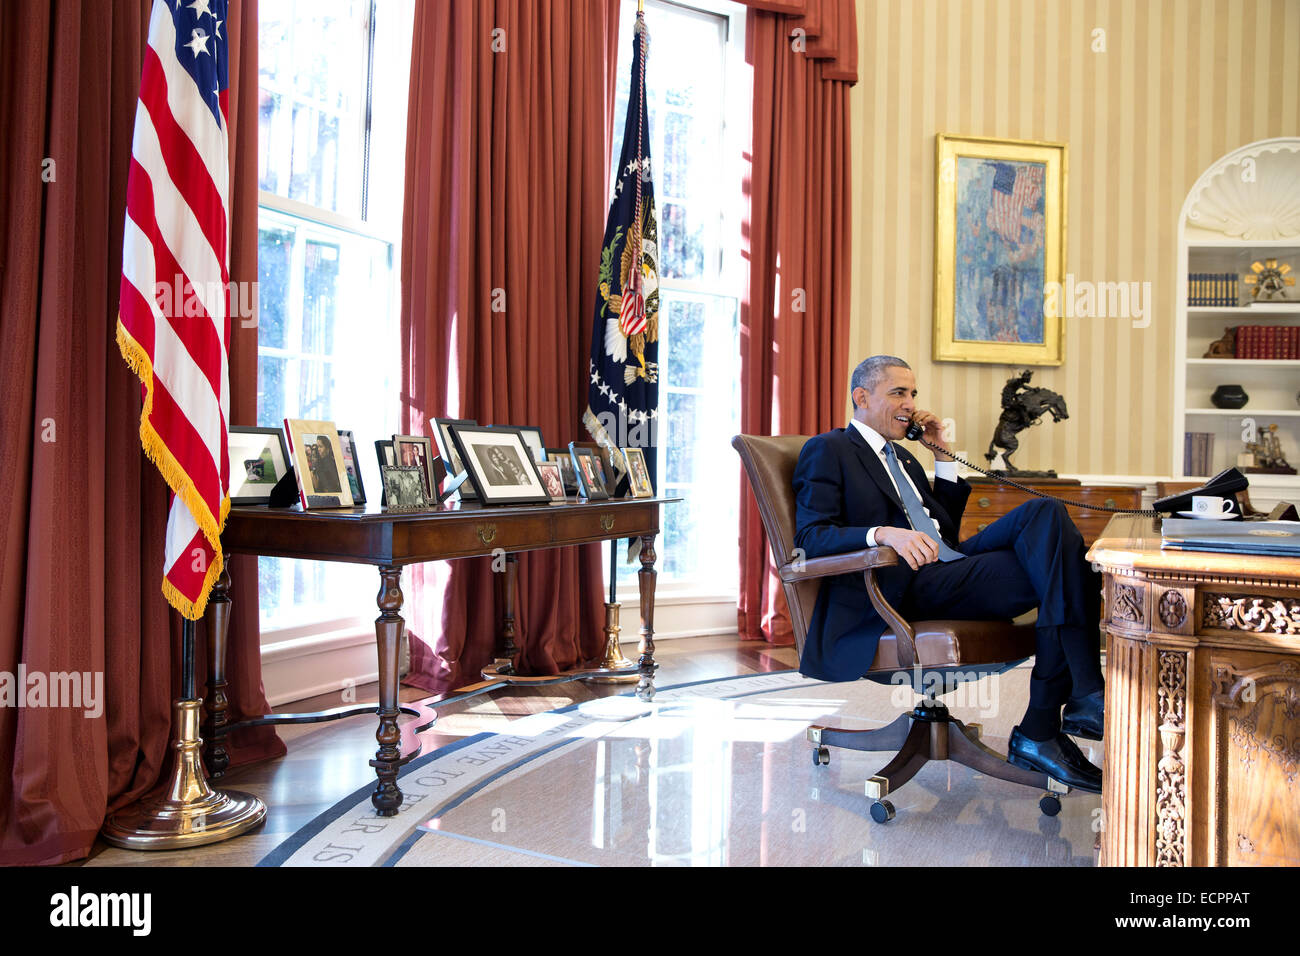 Washington DC, USA. 17th Dec, 2014. USA. 17th Dec, 2014. Photo released by the White House shows U.S. President Barack Obama talking on the phone with Alan Gross who was en route to the U.S. from Cuba after being released, in the Oval Office of the White House in Washington Dec. 17, 2014. Credit:  Official White House Photo/Pete Souza/Xinhua/Alamy Live News Stock Photo